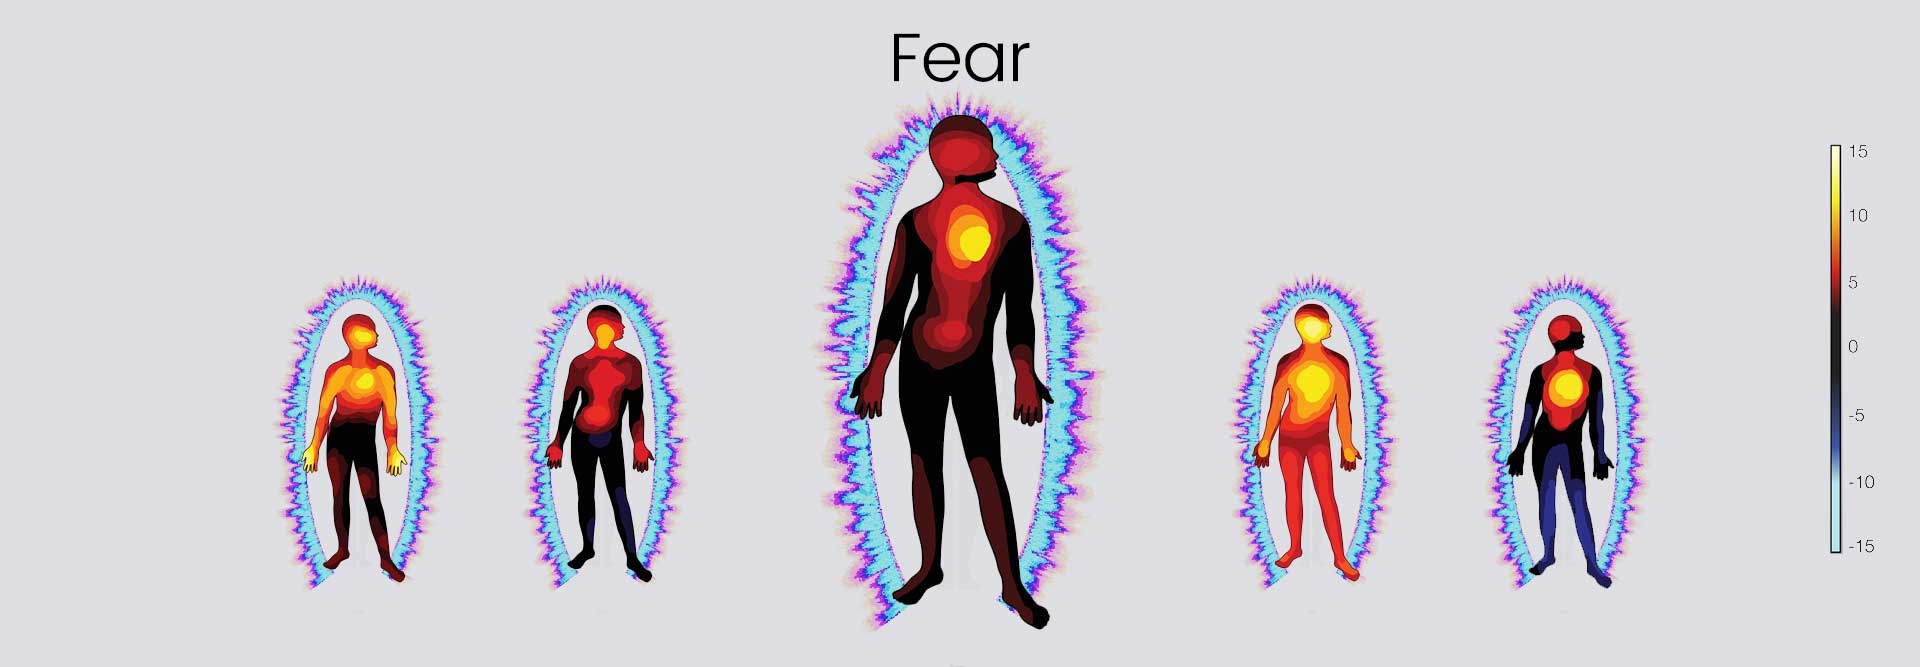 How the brain reacts when we feel fear prepares for fight or flight